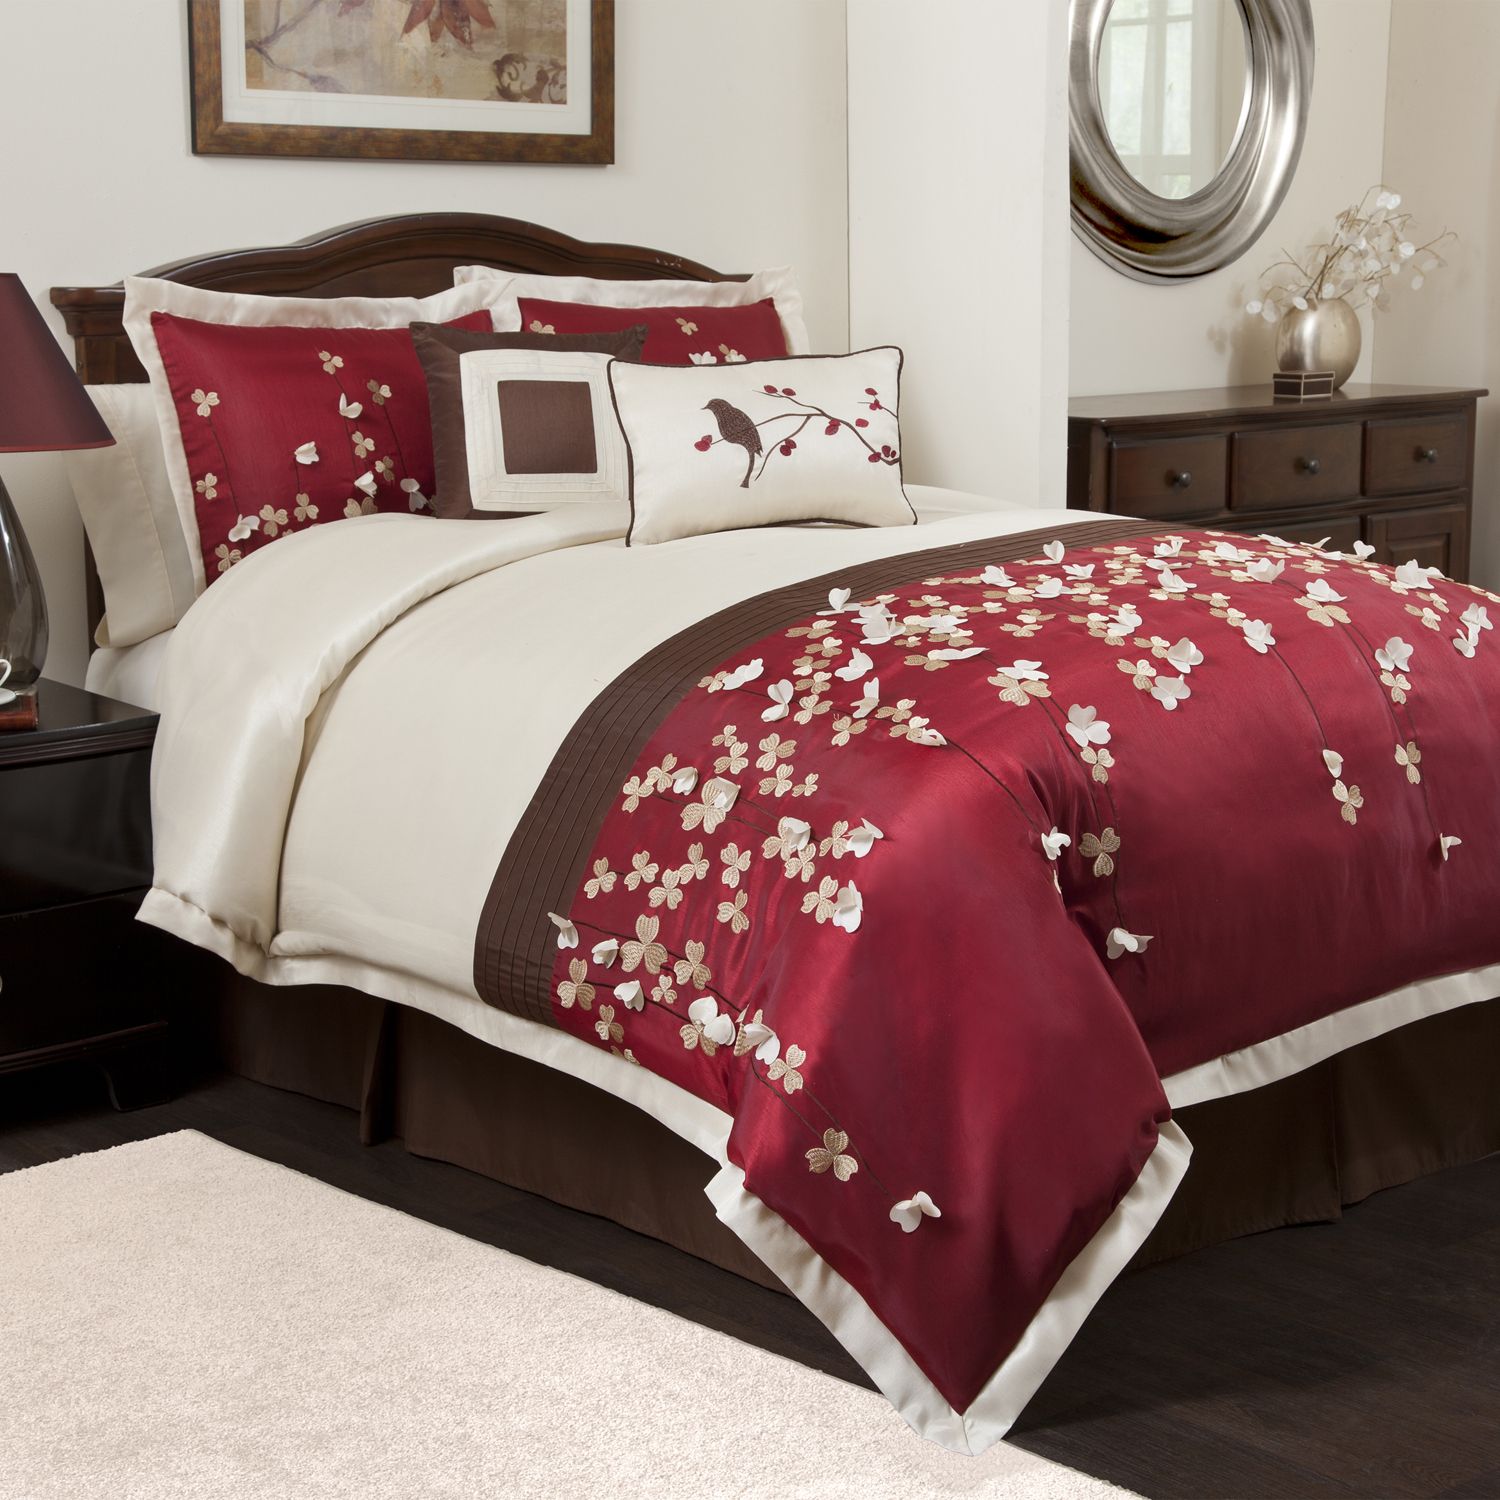 Lush Decor Flower Drops 6-pc Red Comforter Set Red Queen